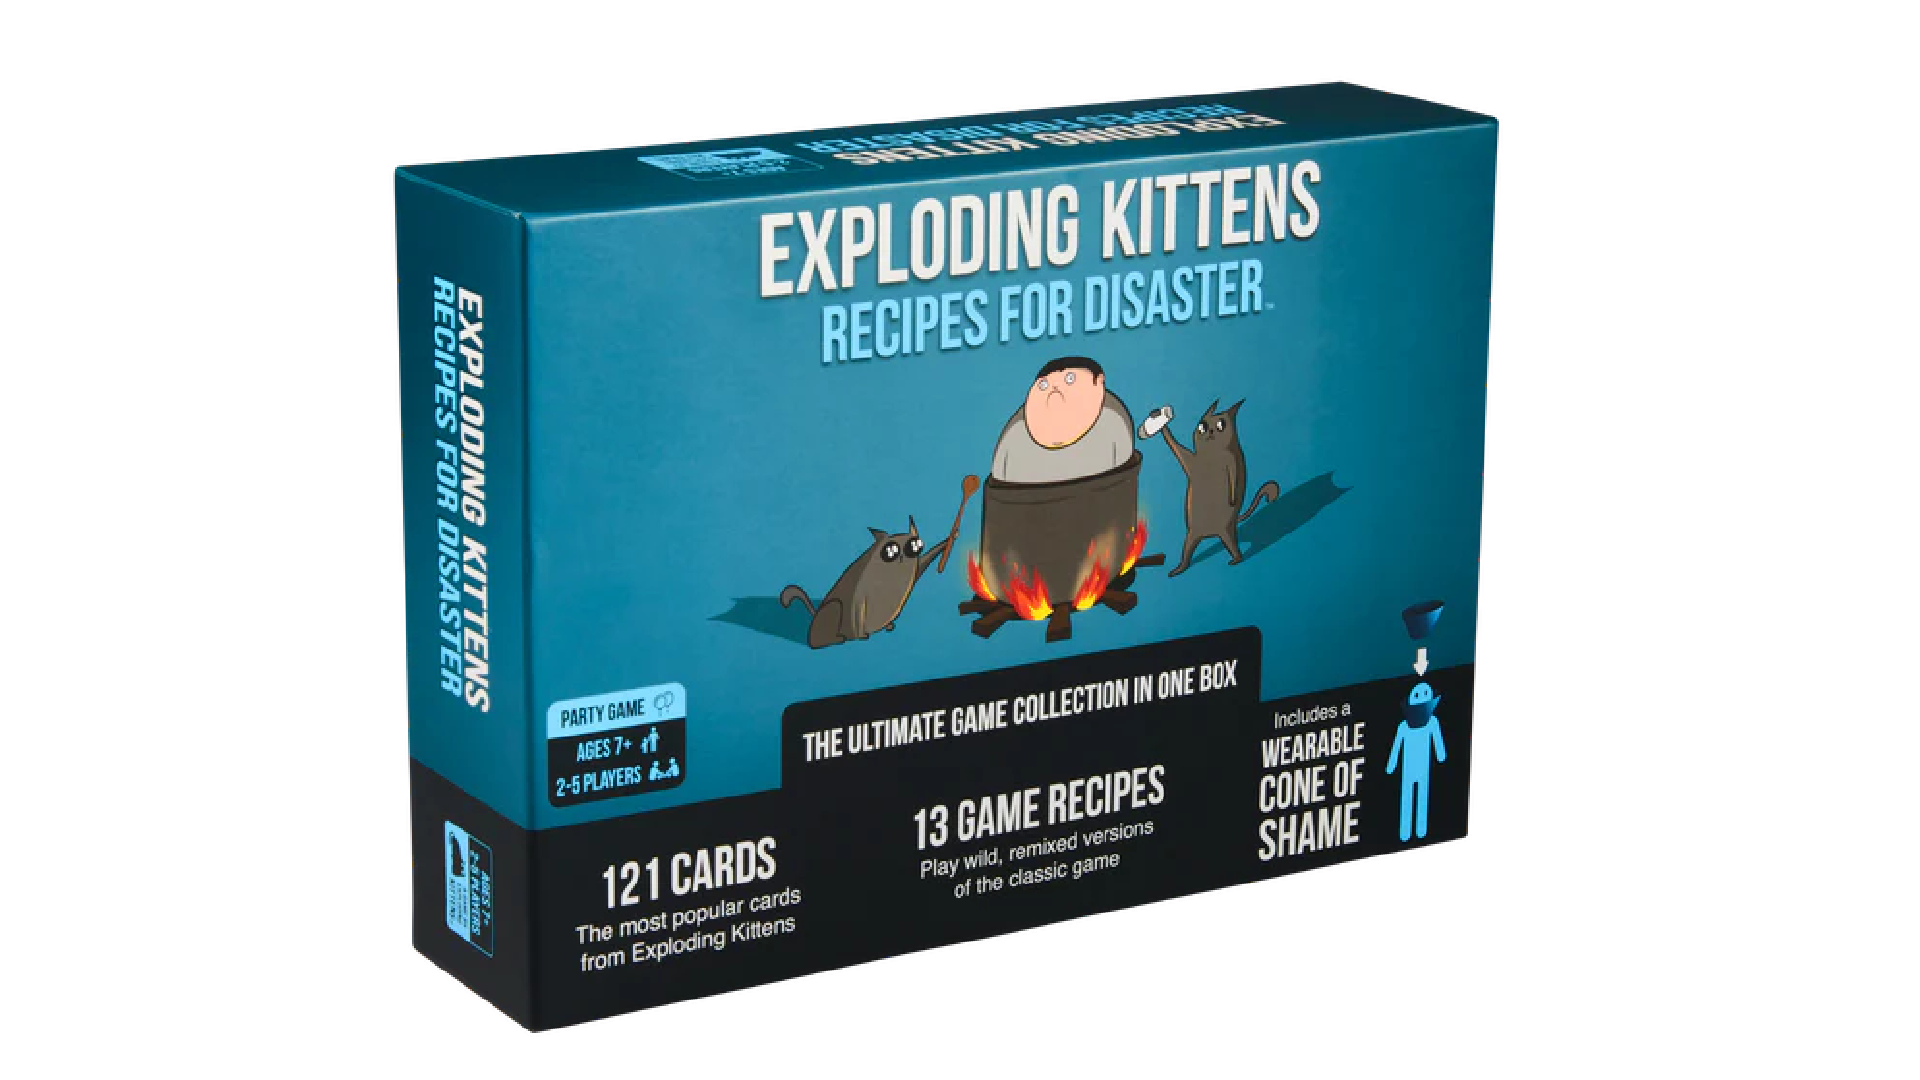 Image for There's up to 45% off Exploding Kittens games and puzzles at Amazon UK